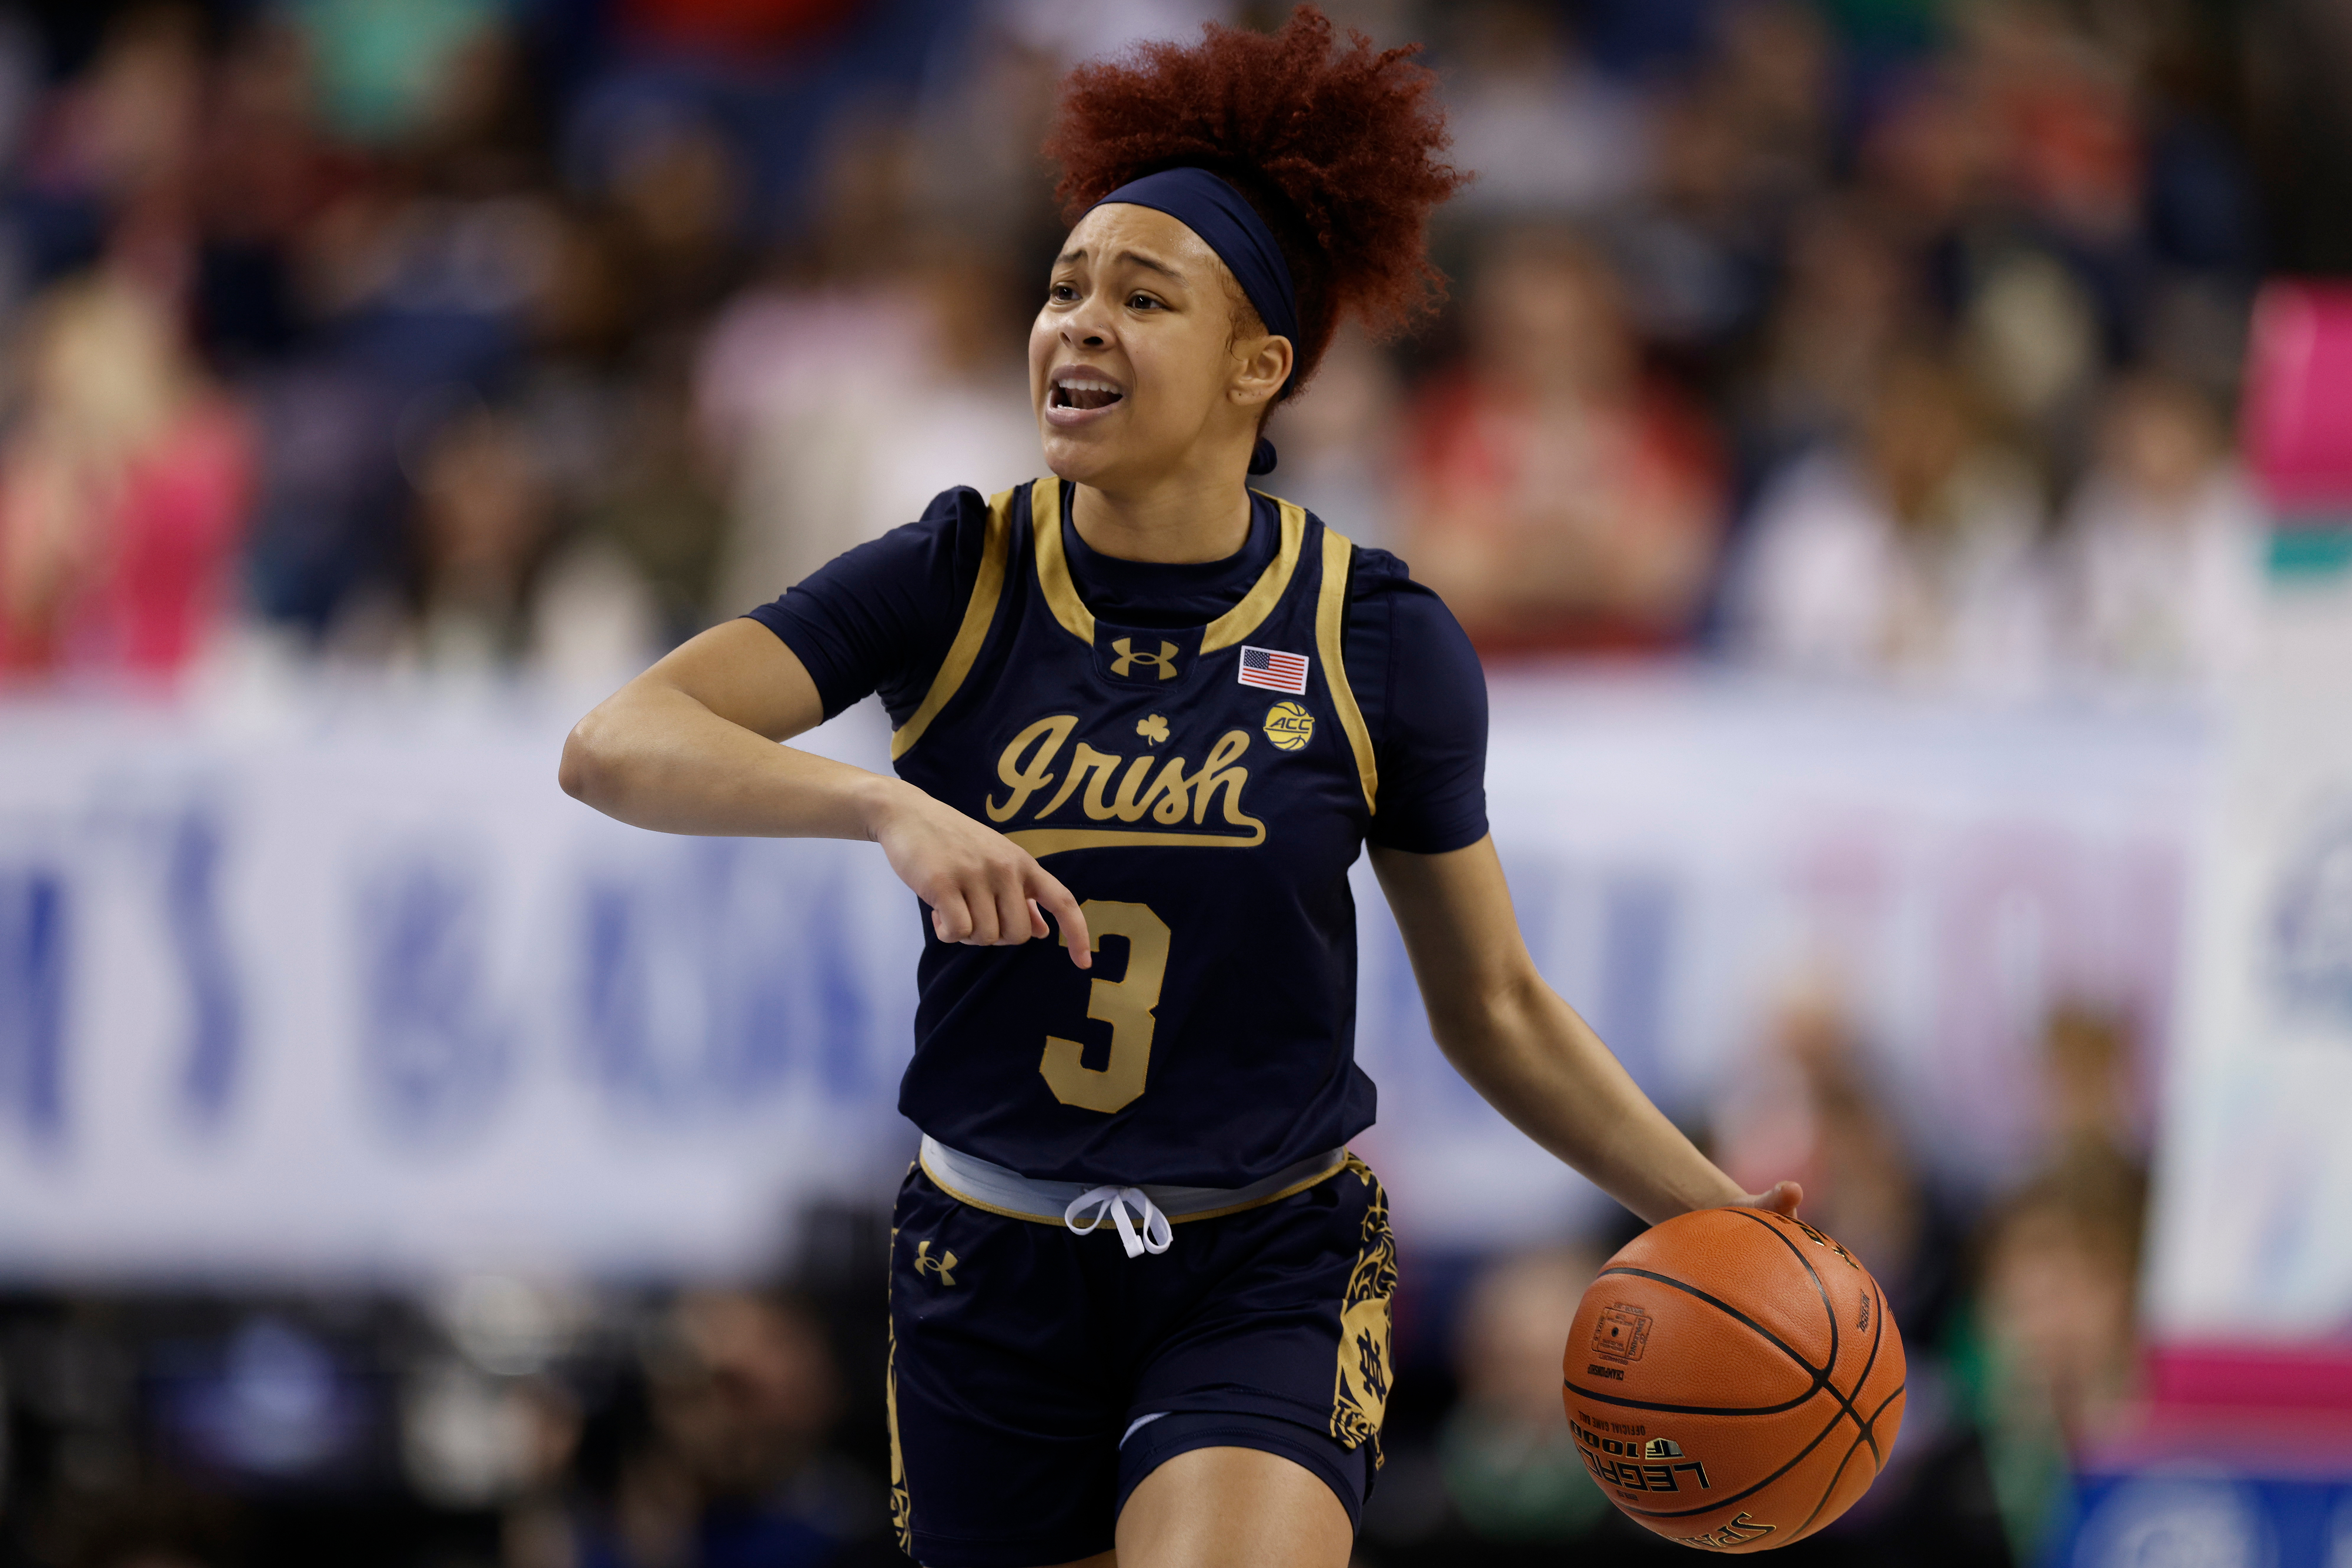 Notre Dame basketball player in action, dribbling during a game